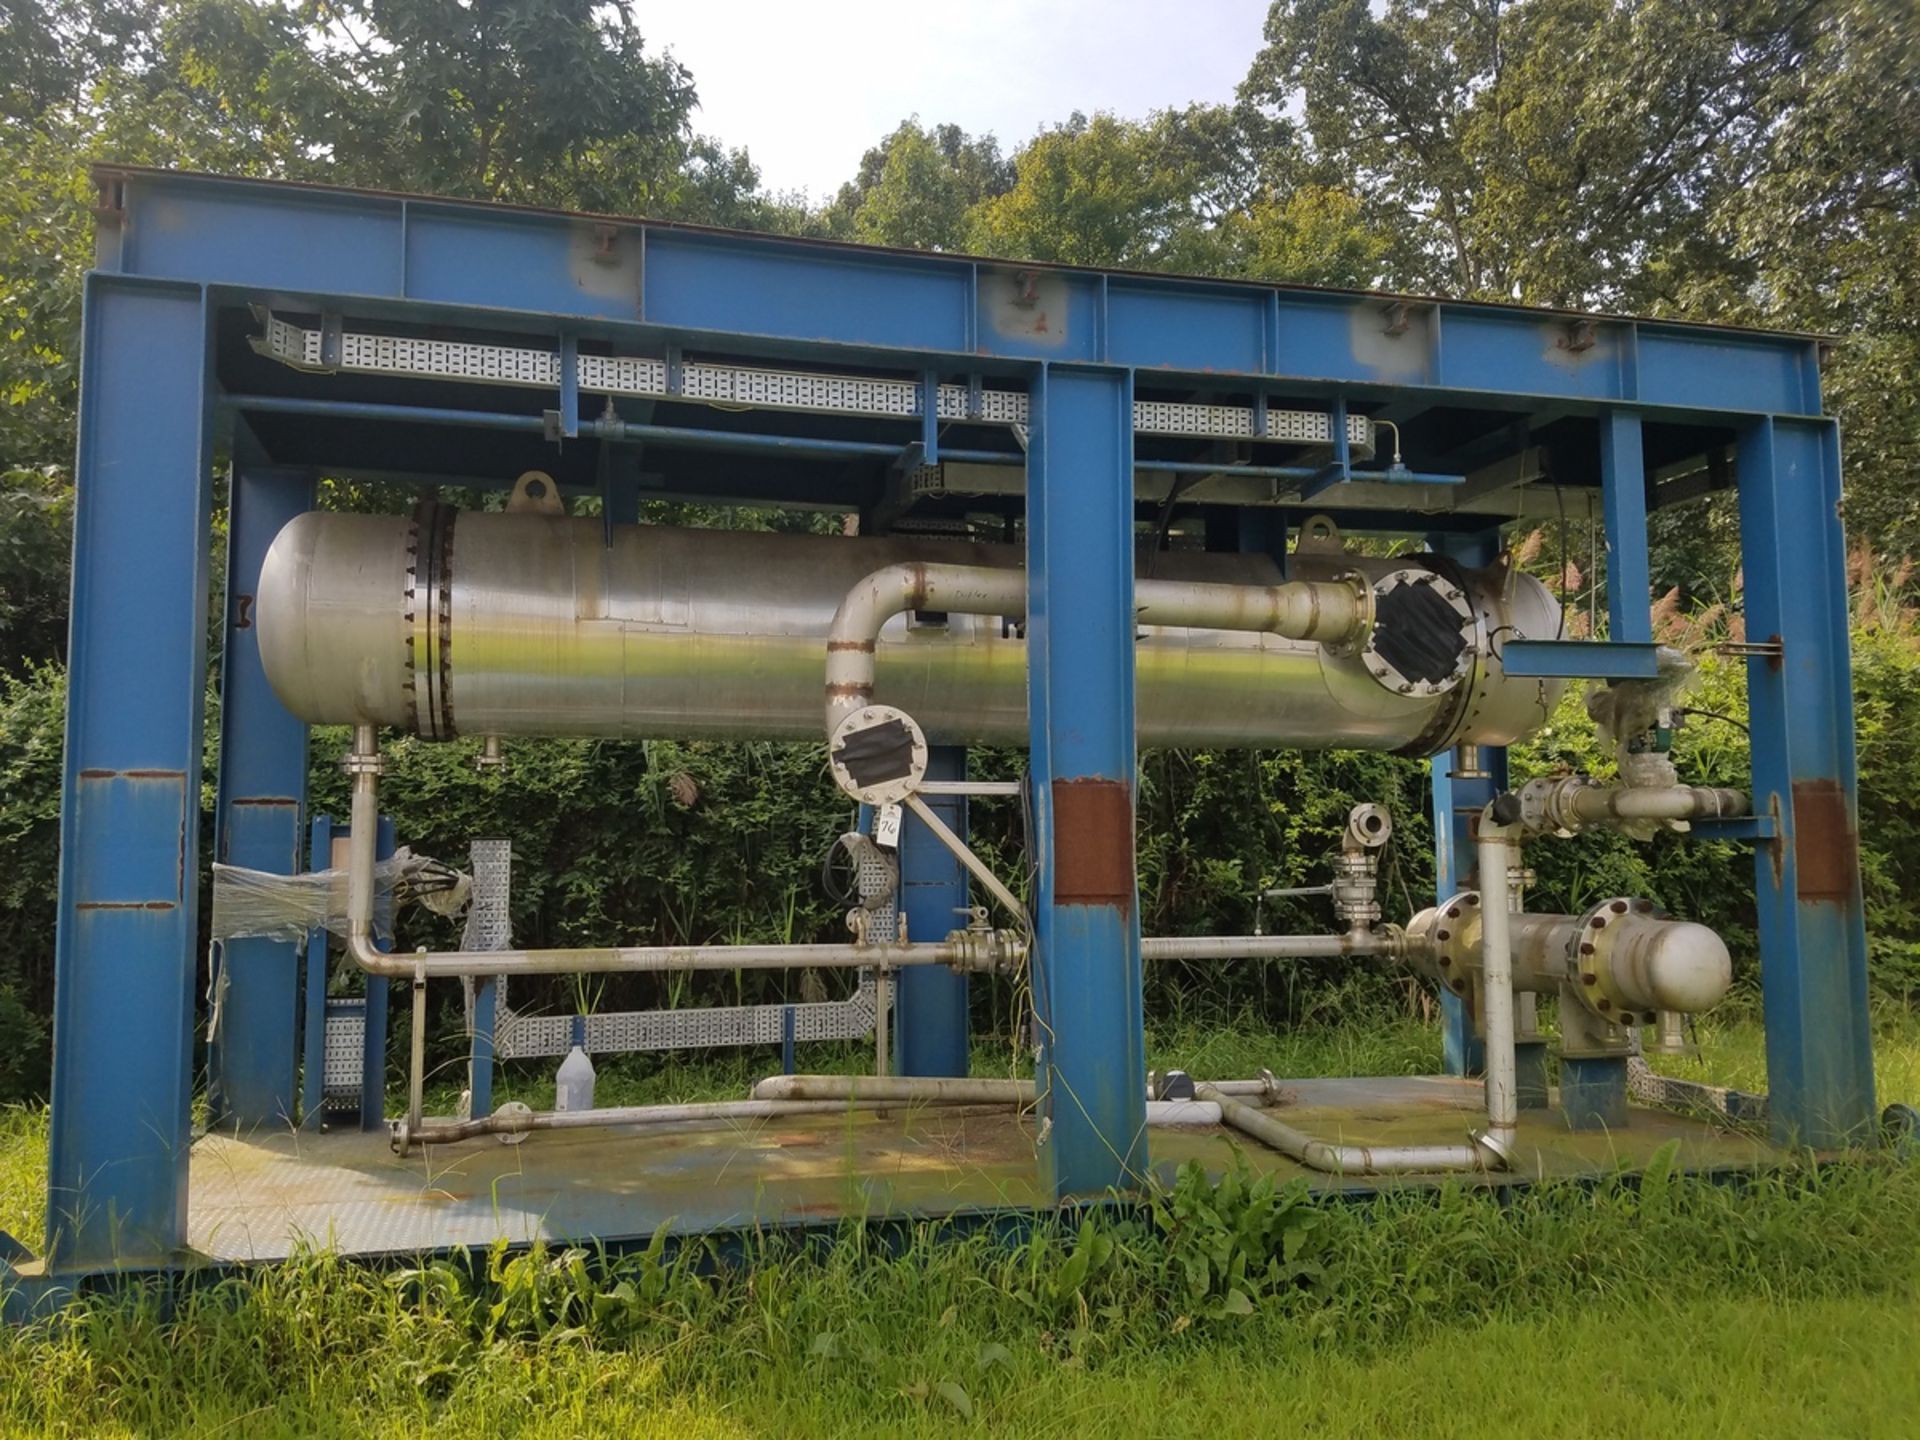 Heat Exchanger Skid / Heat Recovery Condenser, Stainless Steel, Tube Side 0.40 M | Rig Fee: $2500